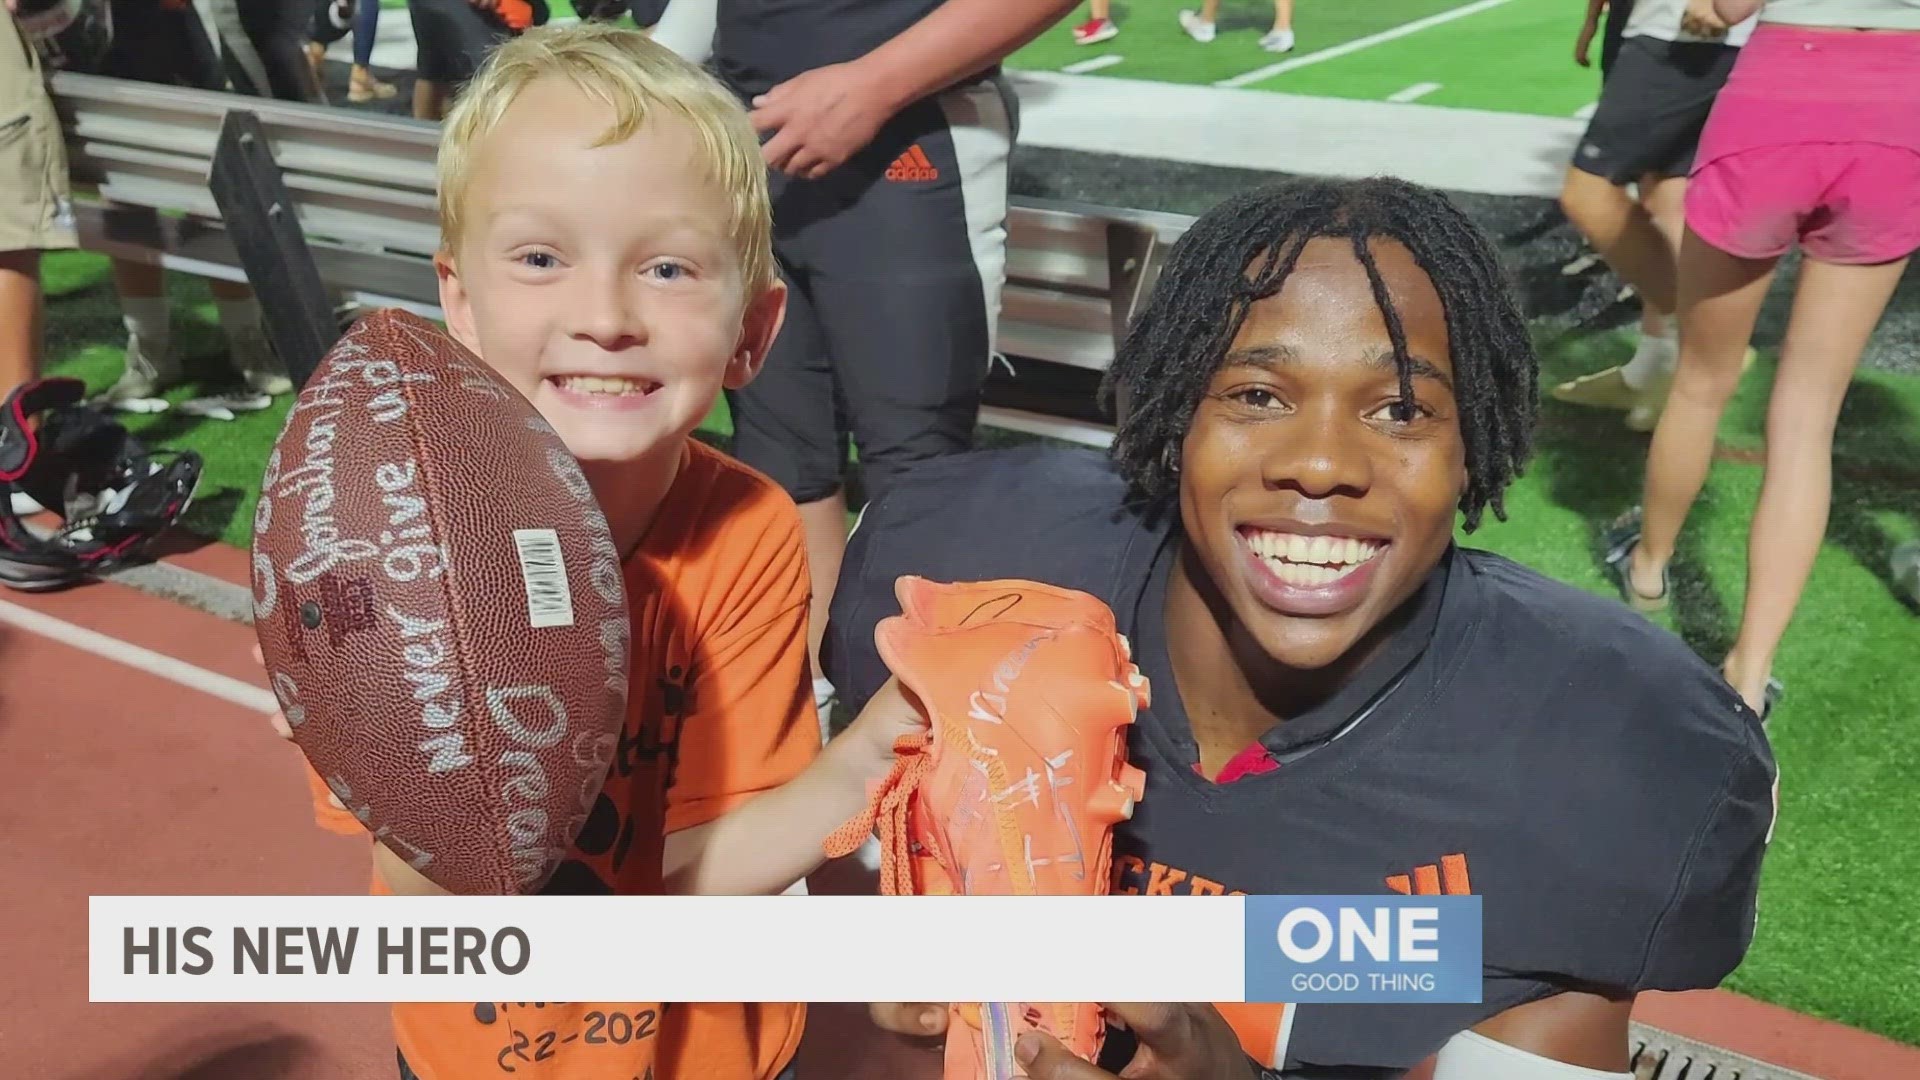 Jonathan Hyzer was celebrating a victory when he met a second grader named Fischer, and their new friendship has gotten quite a bit of attention on social media.